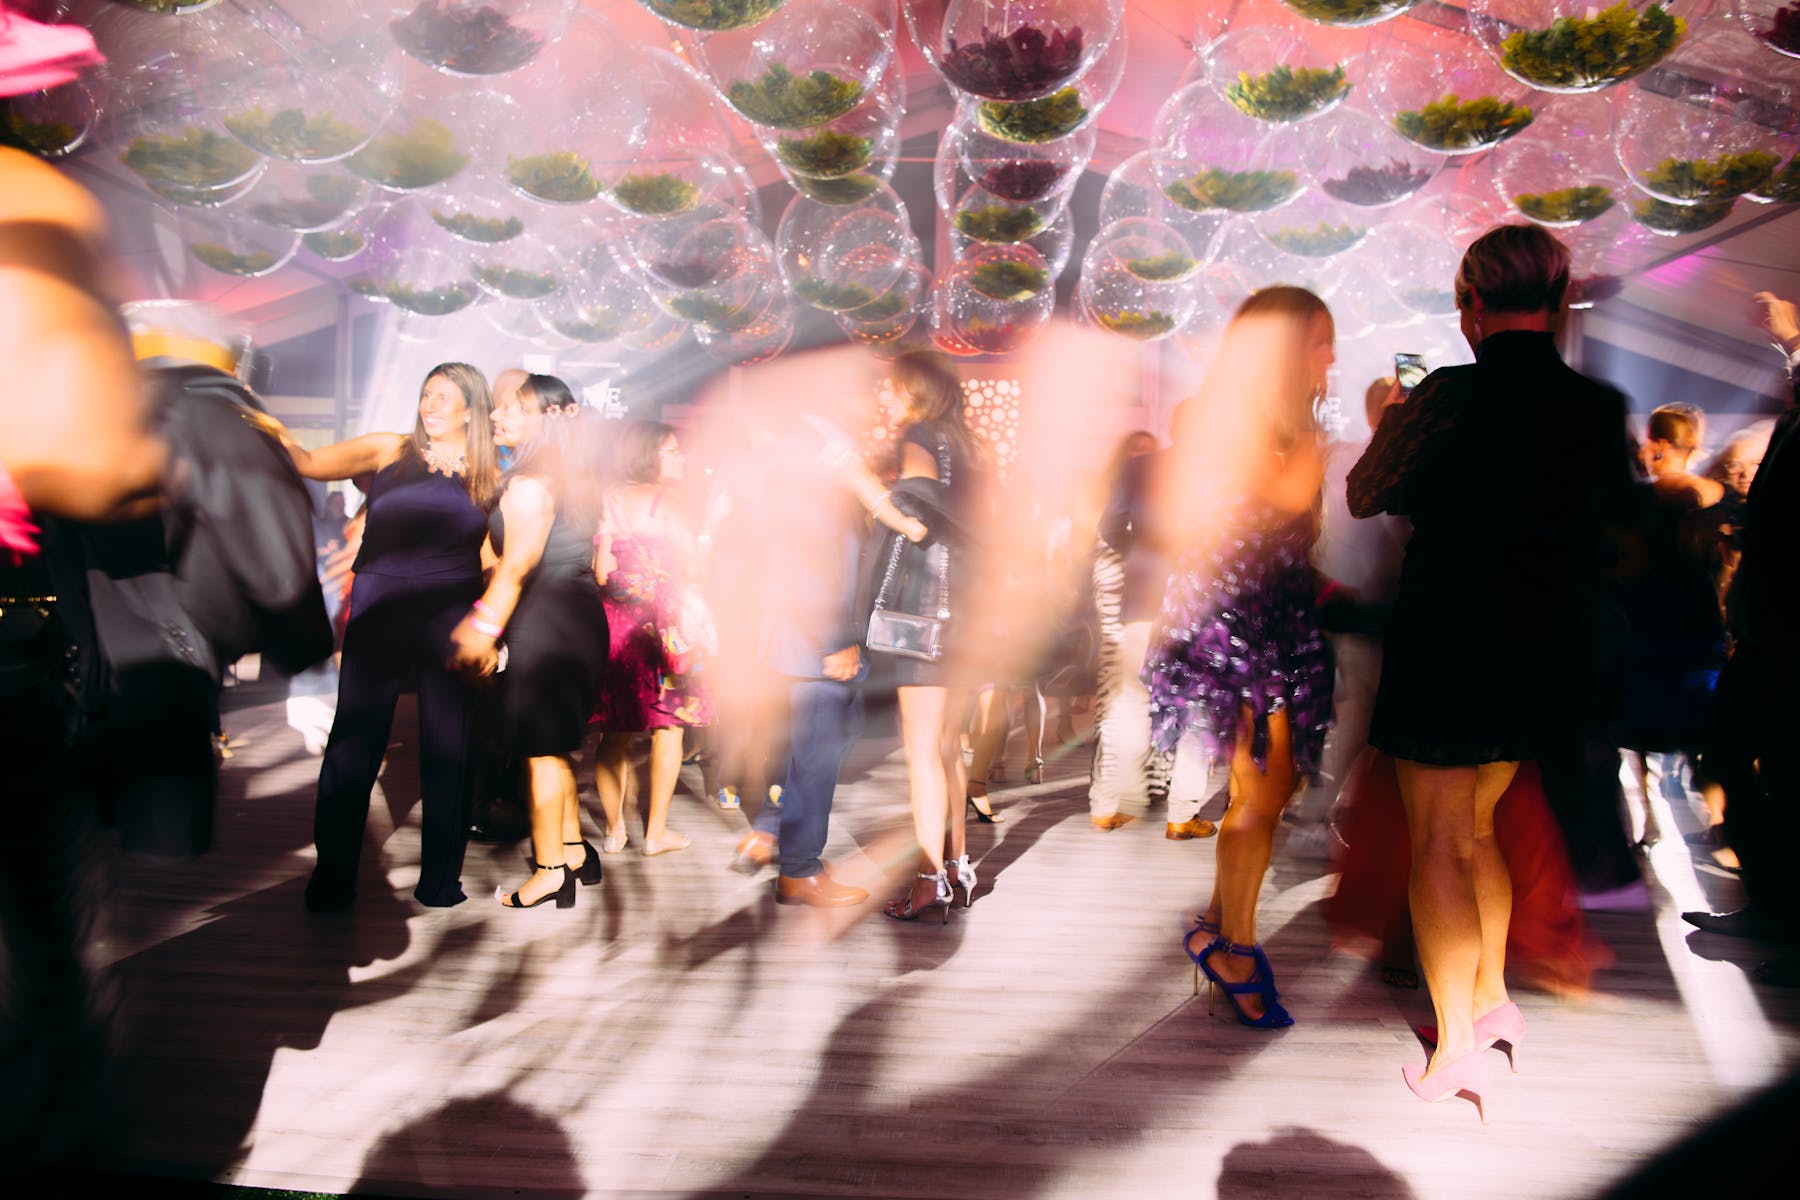 Blurry image of people dancing under translucent globes